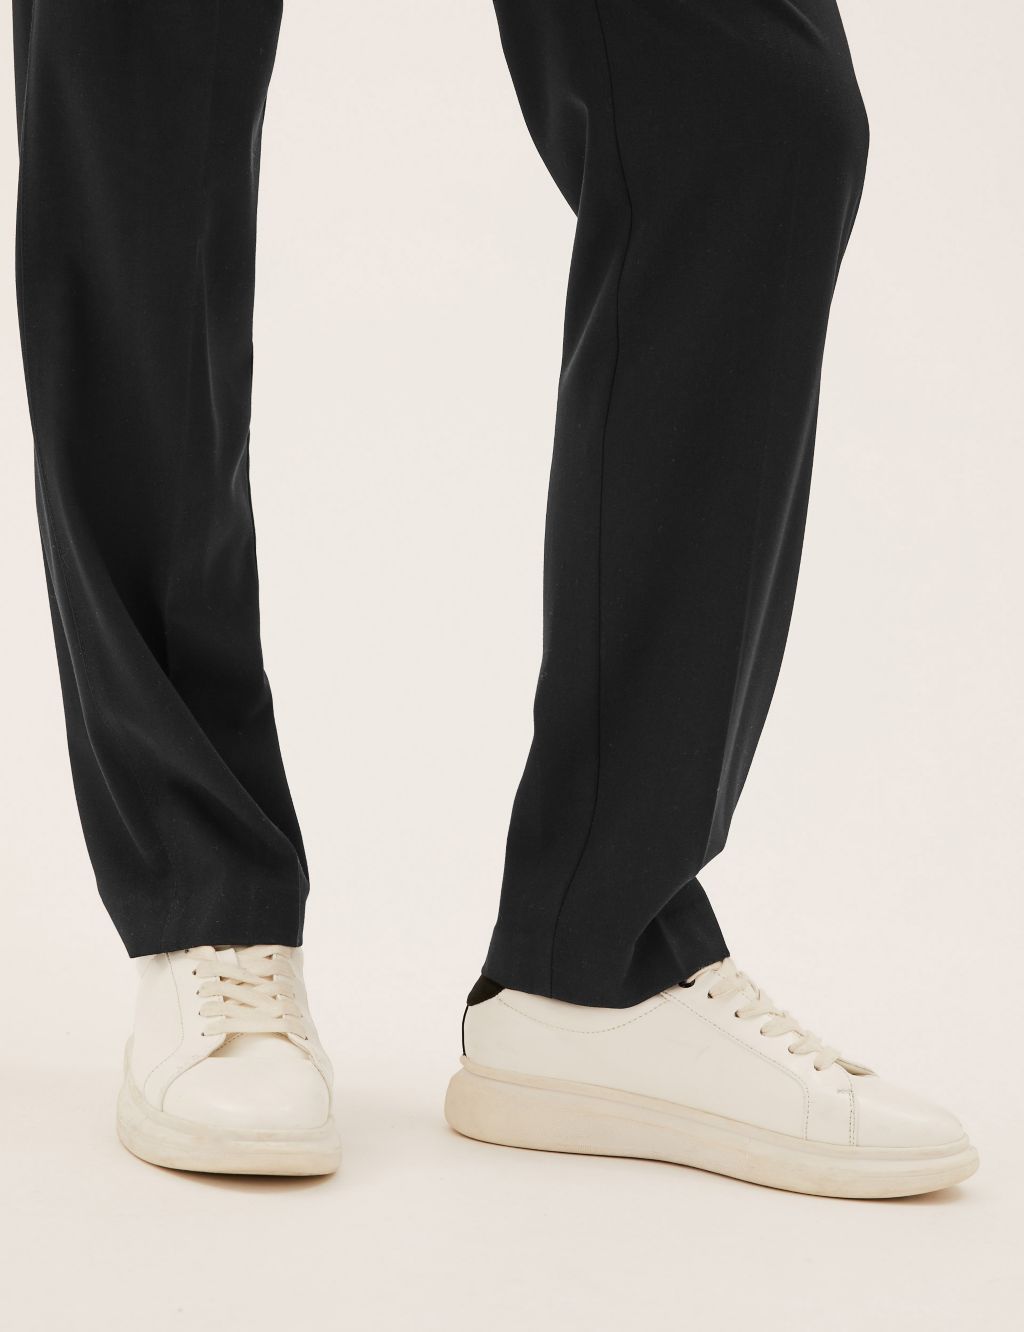 Straight Leg Trousers with Stretch image 5